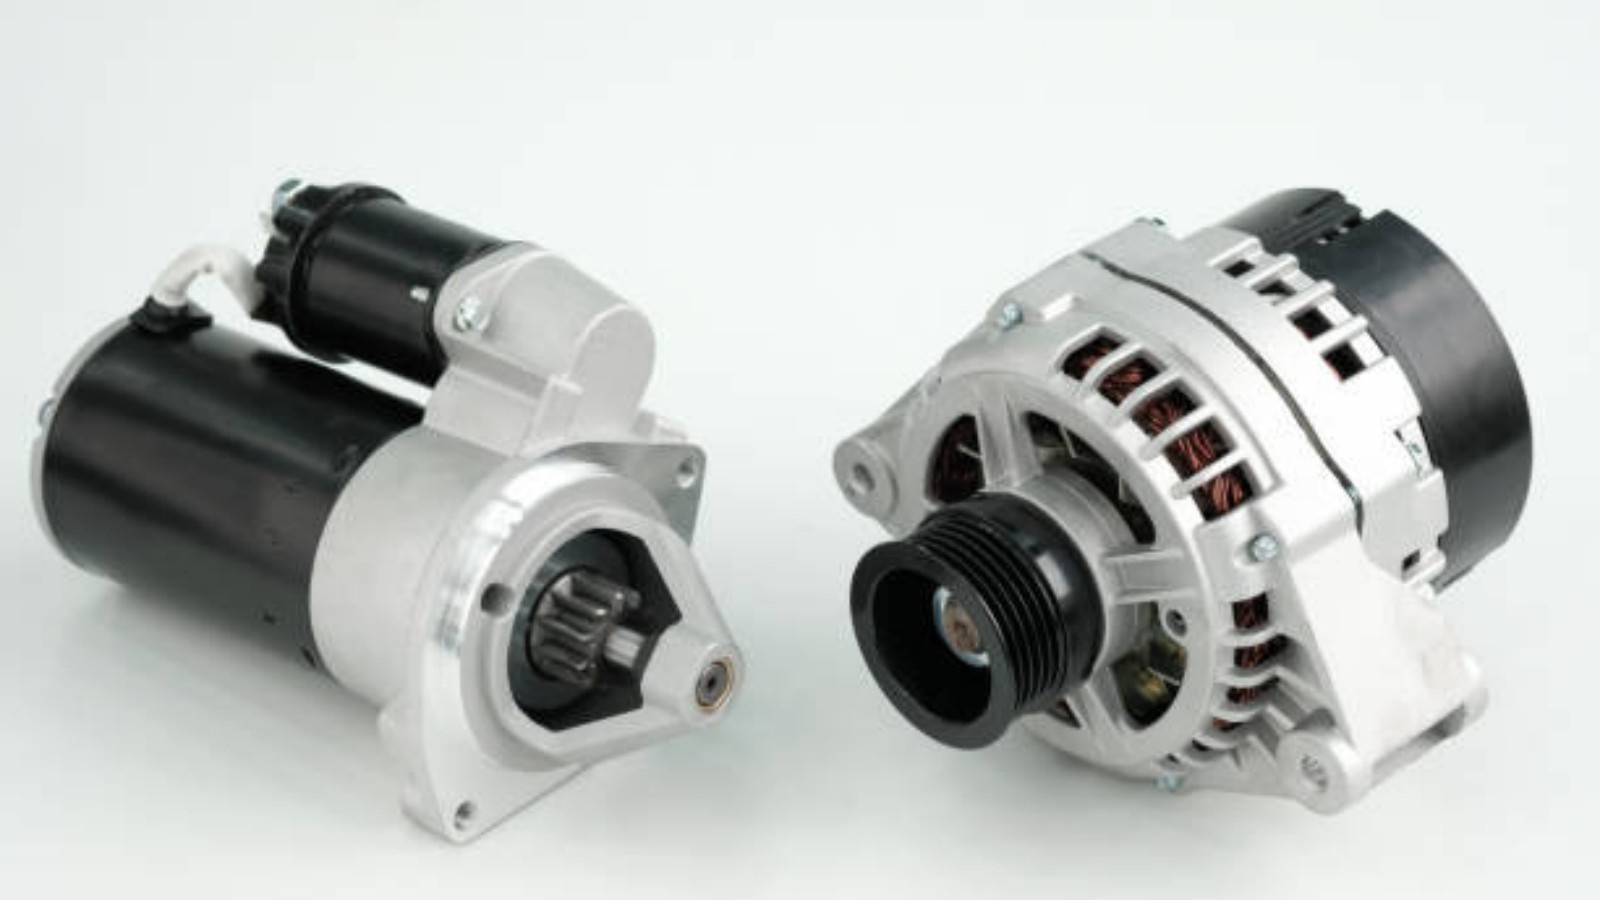 The Difference Between Single Phase and Three Phase Motors